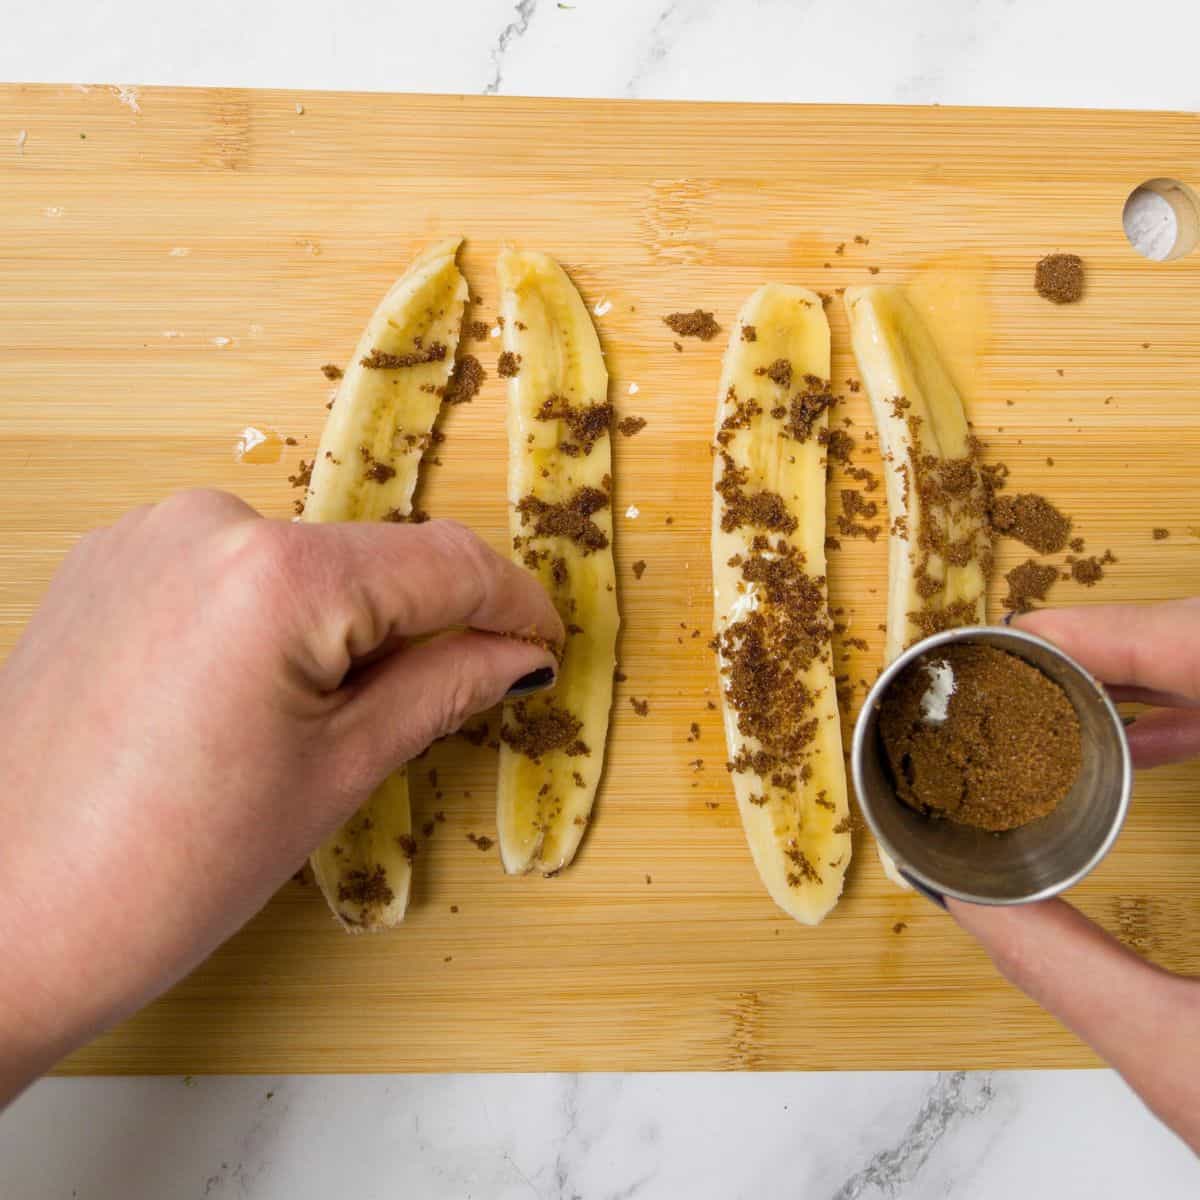 Four sliced bananas on a chopping board with someone sprinkling brown sugar on them.